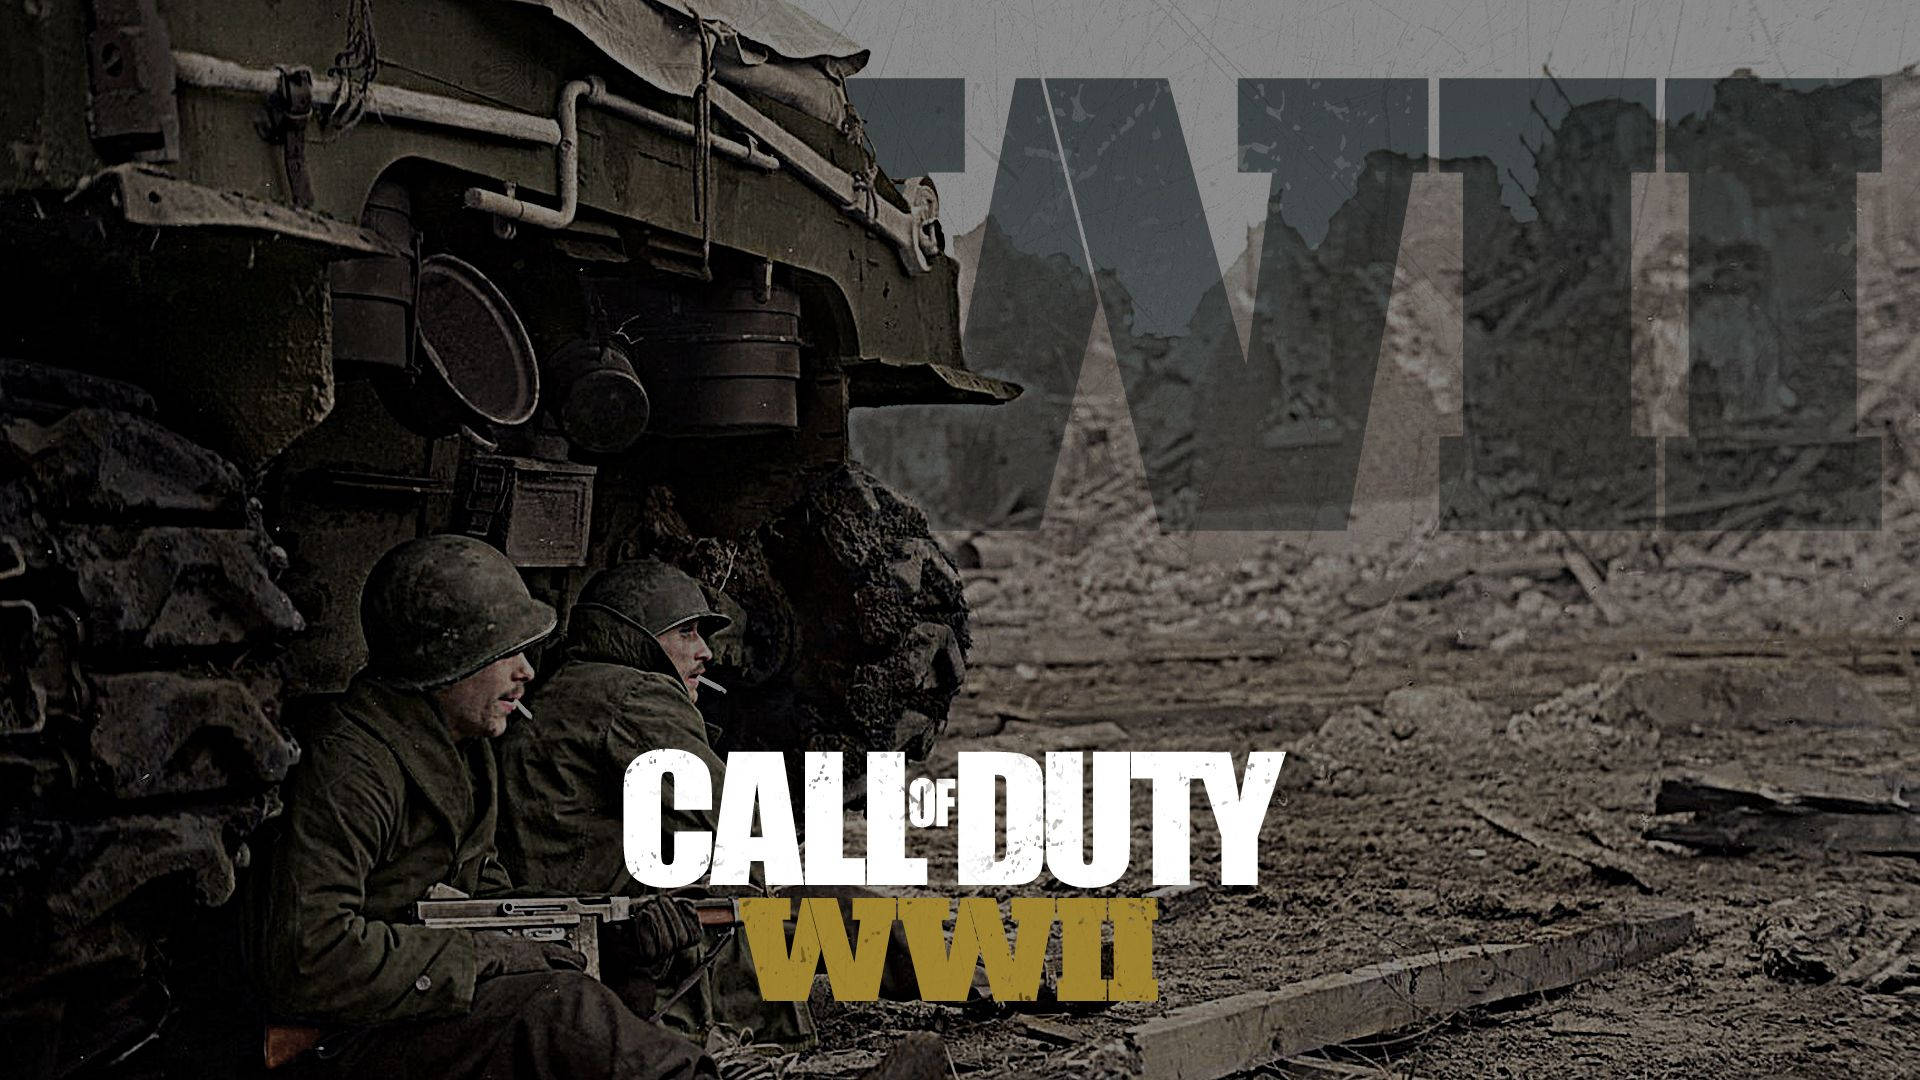 Free Ww2 Wallpaper Downloads, [100+] Ww2 Wallpapers for FREE | Wallpapers .com